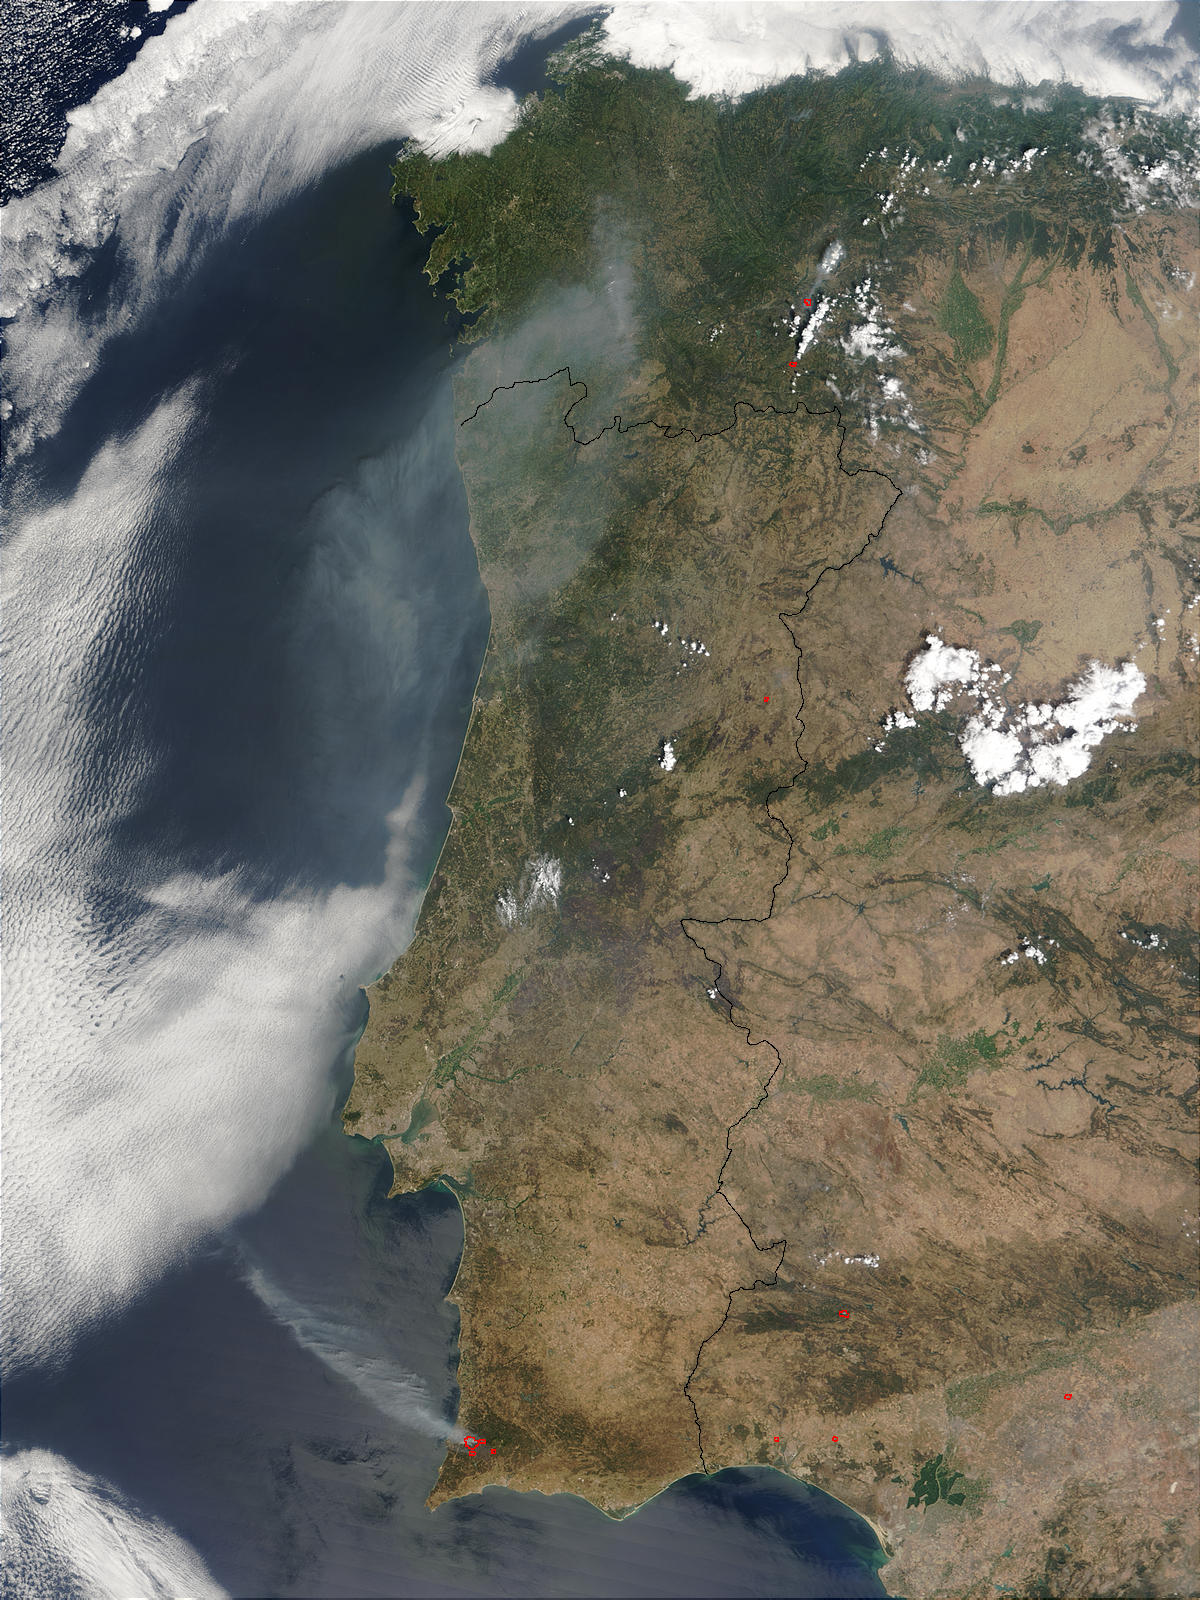 Fires and smoke in Portugal - related image preview